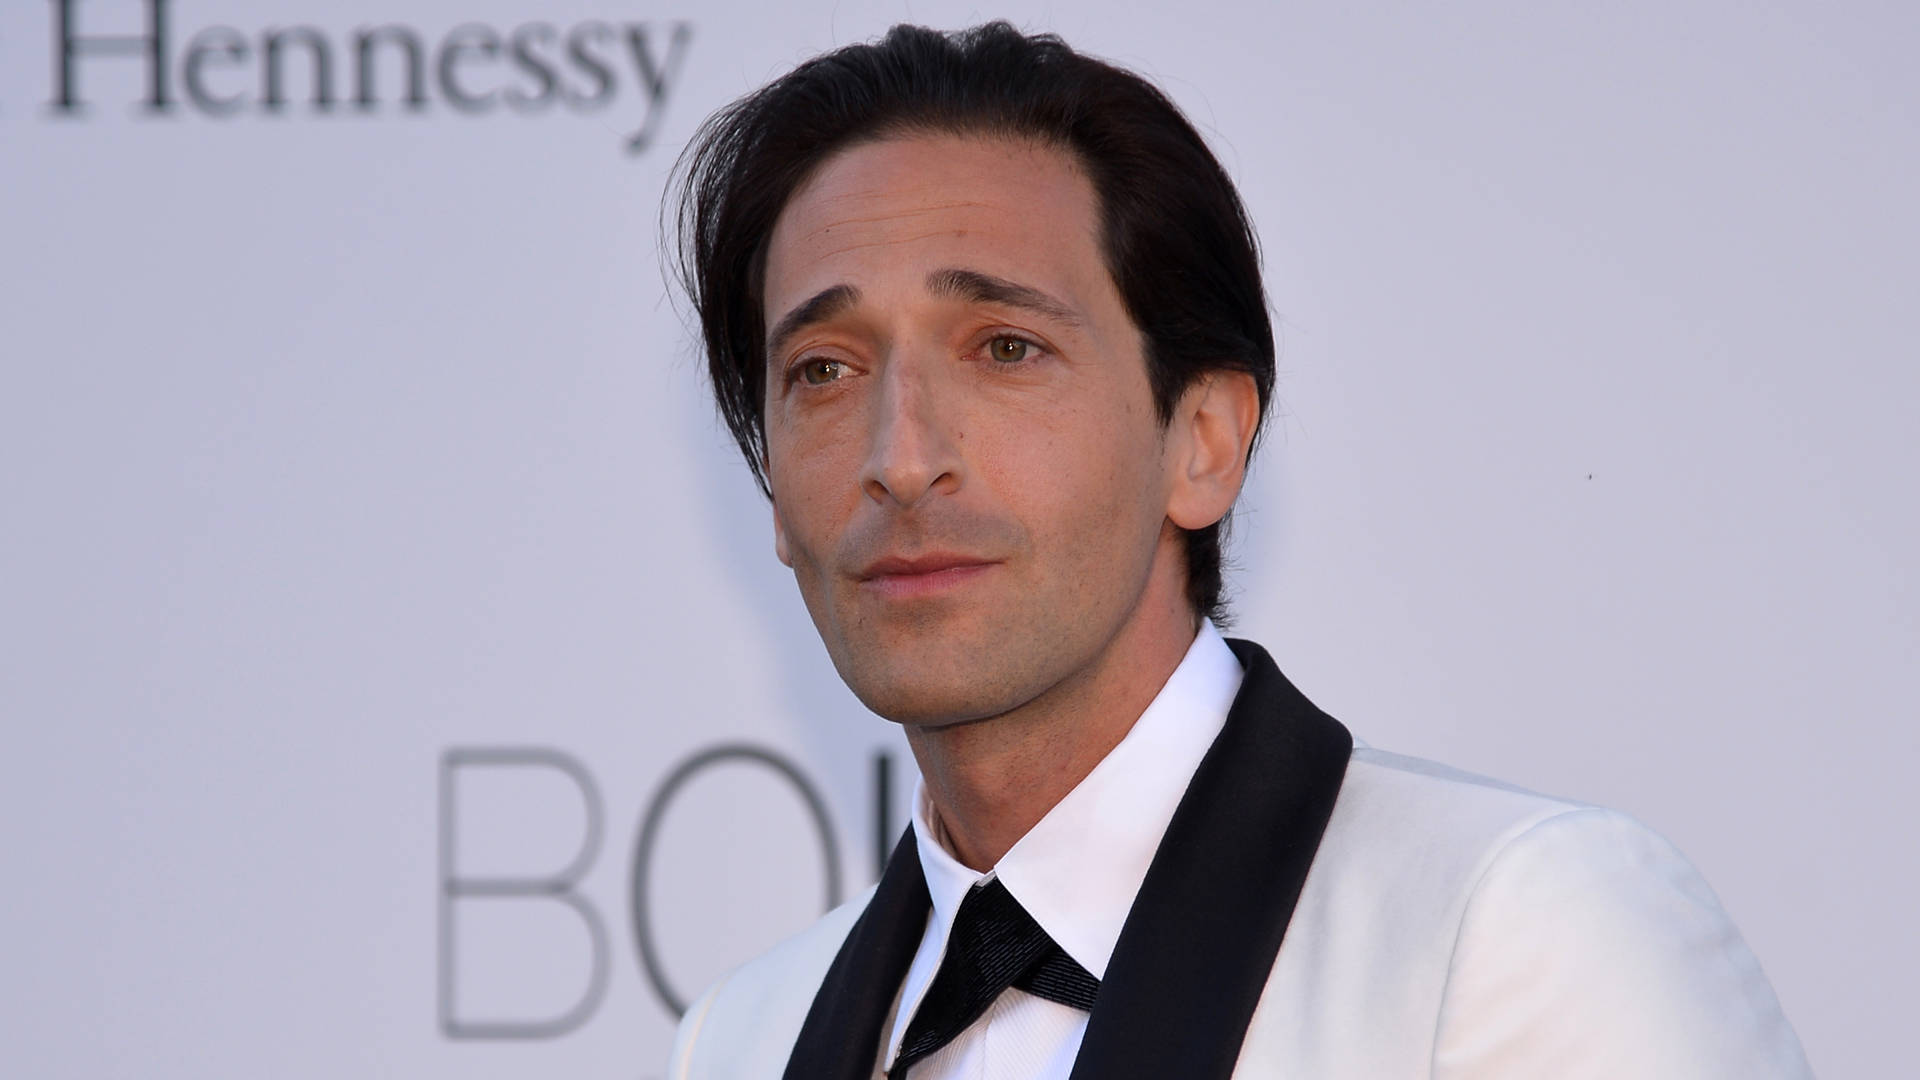 Adrien Brody In A Stunning White Suit.